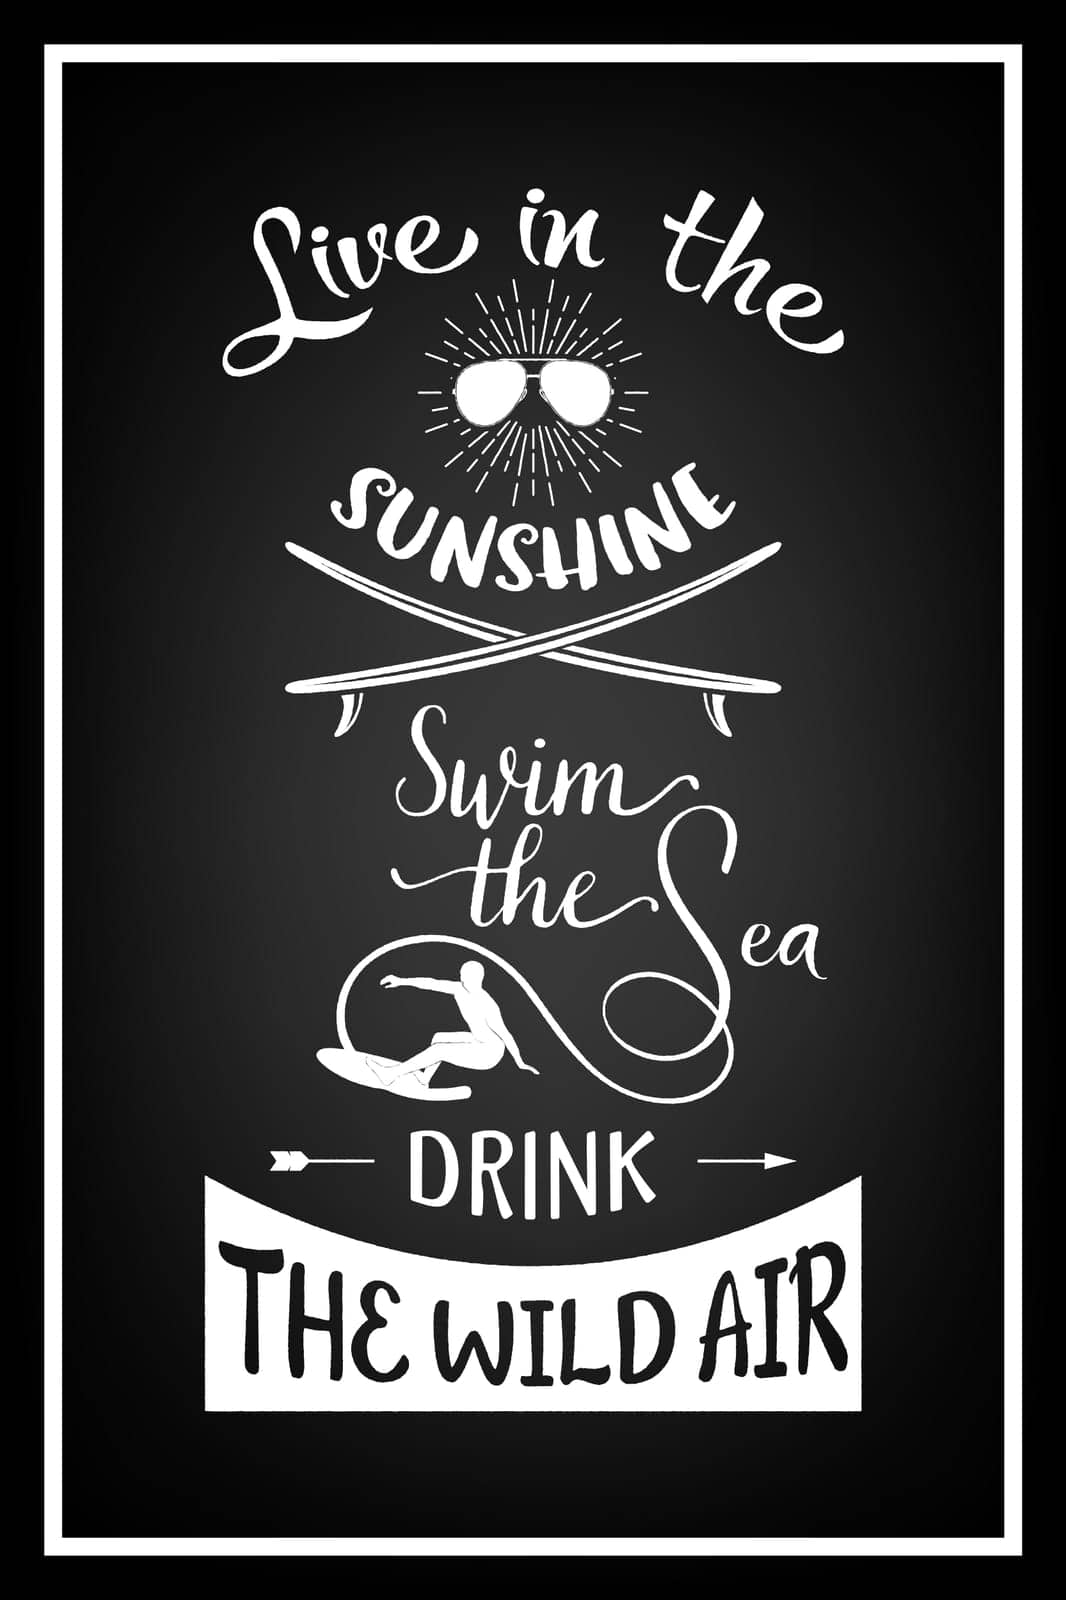 Live in the sunshine swim the sea drink the wild air - Quote Typographical Background by Gomolach